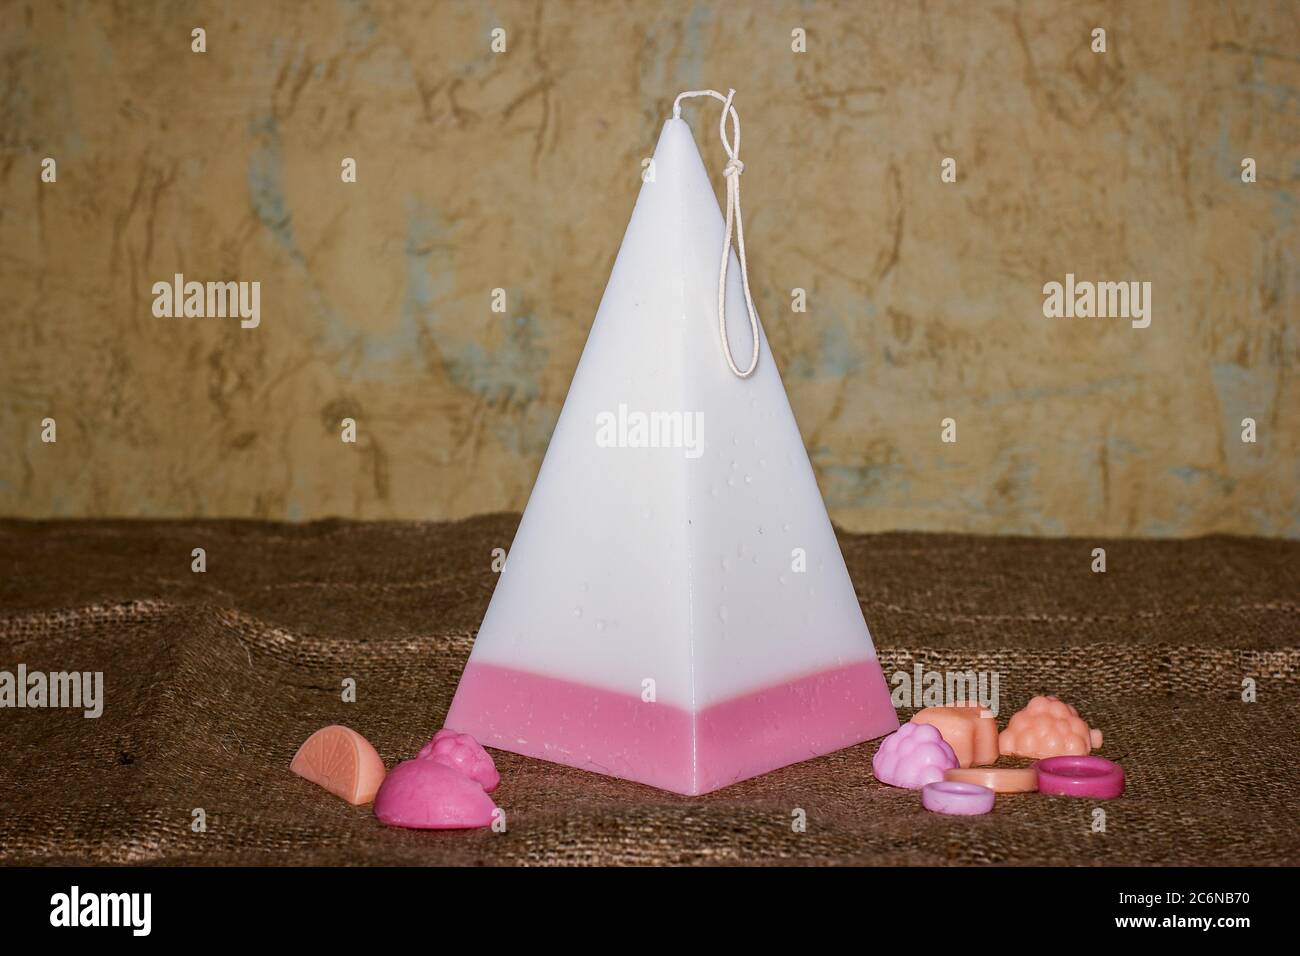 Decorative Handmade candles in the shape of a pyramid Stock Photo